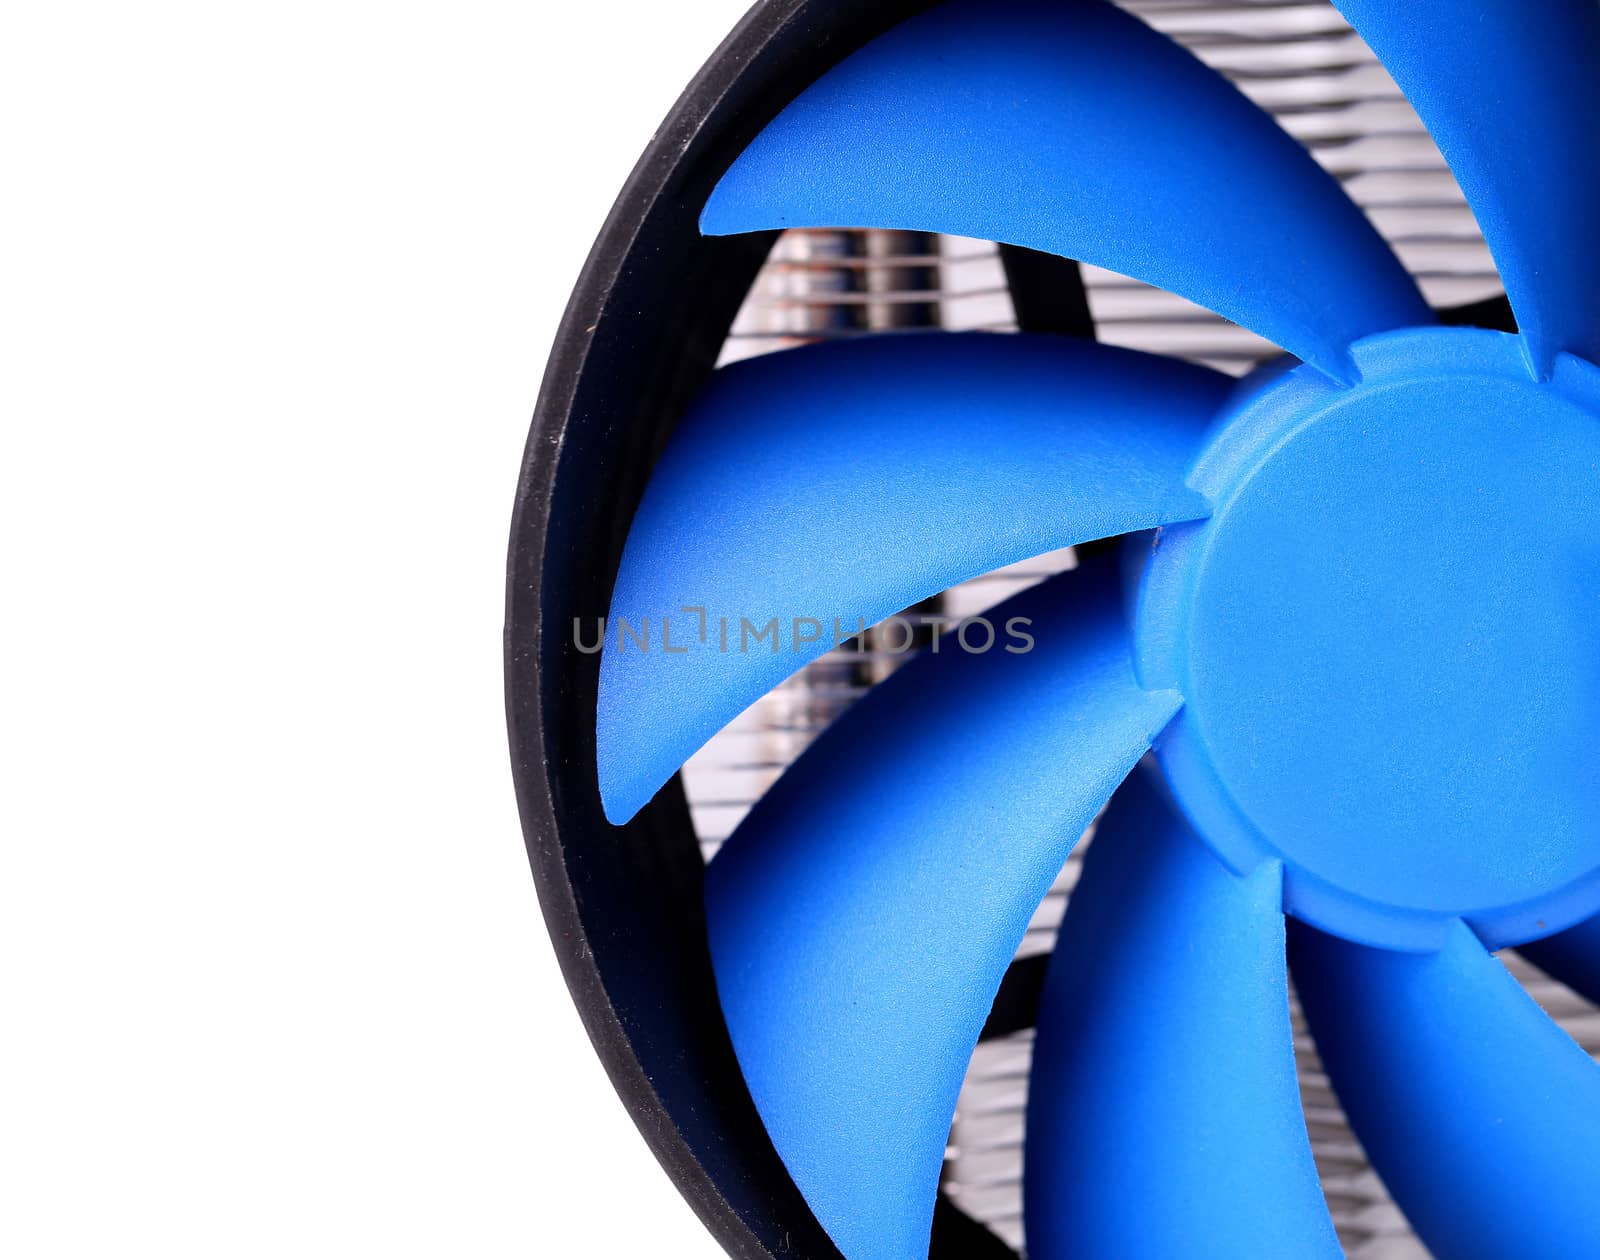 Powerful computer cooler with blue fun by indigolotos